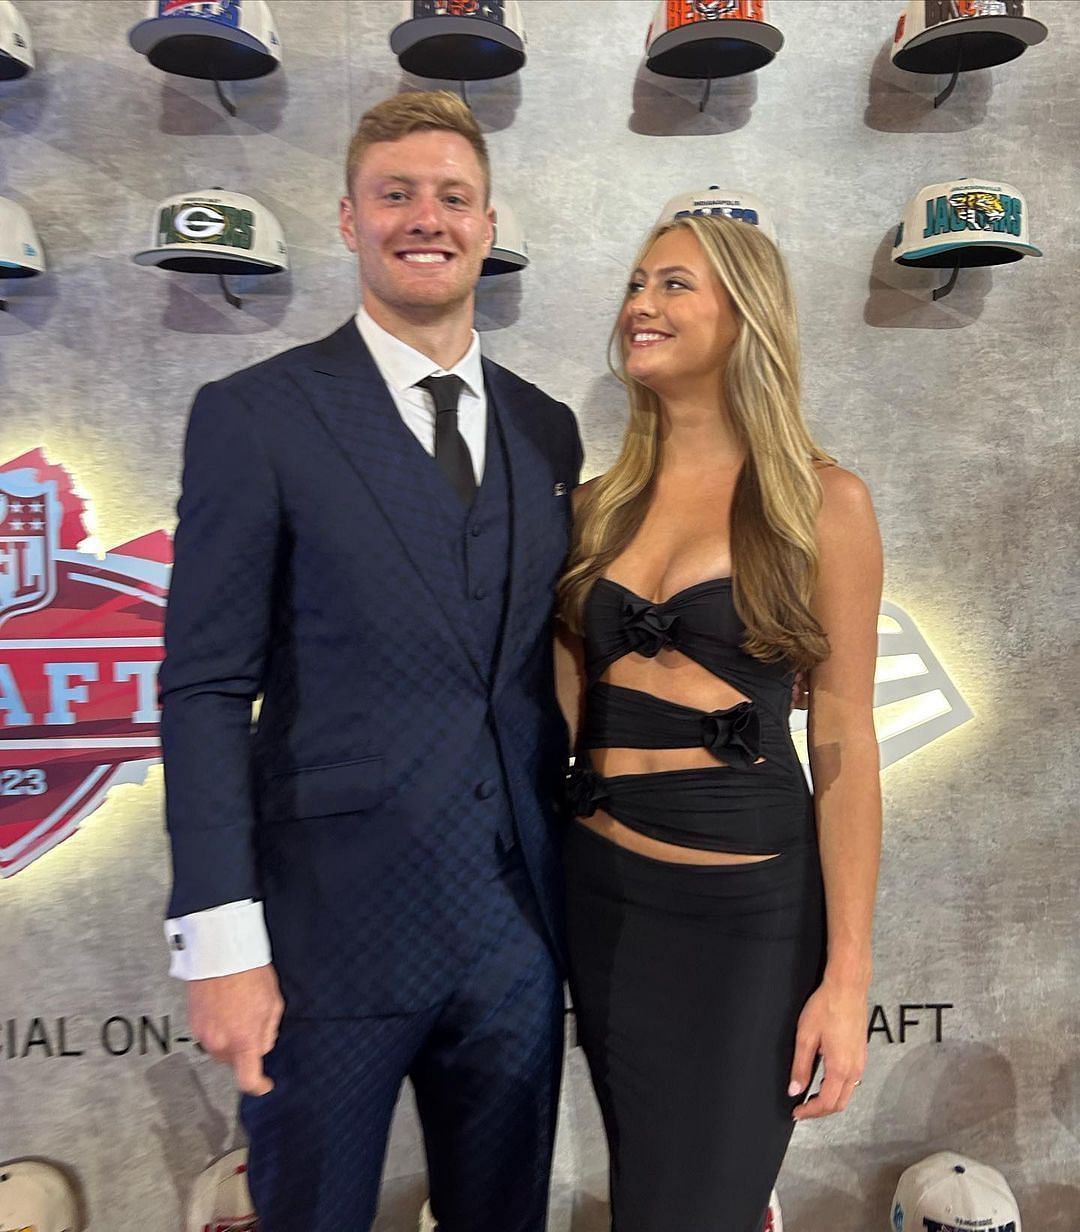 Will and Kelley Levis at the 2023 NFL Draft (Image credit: Instagram.com/kelleylevis)